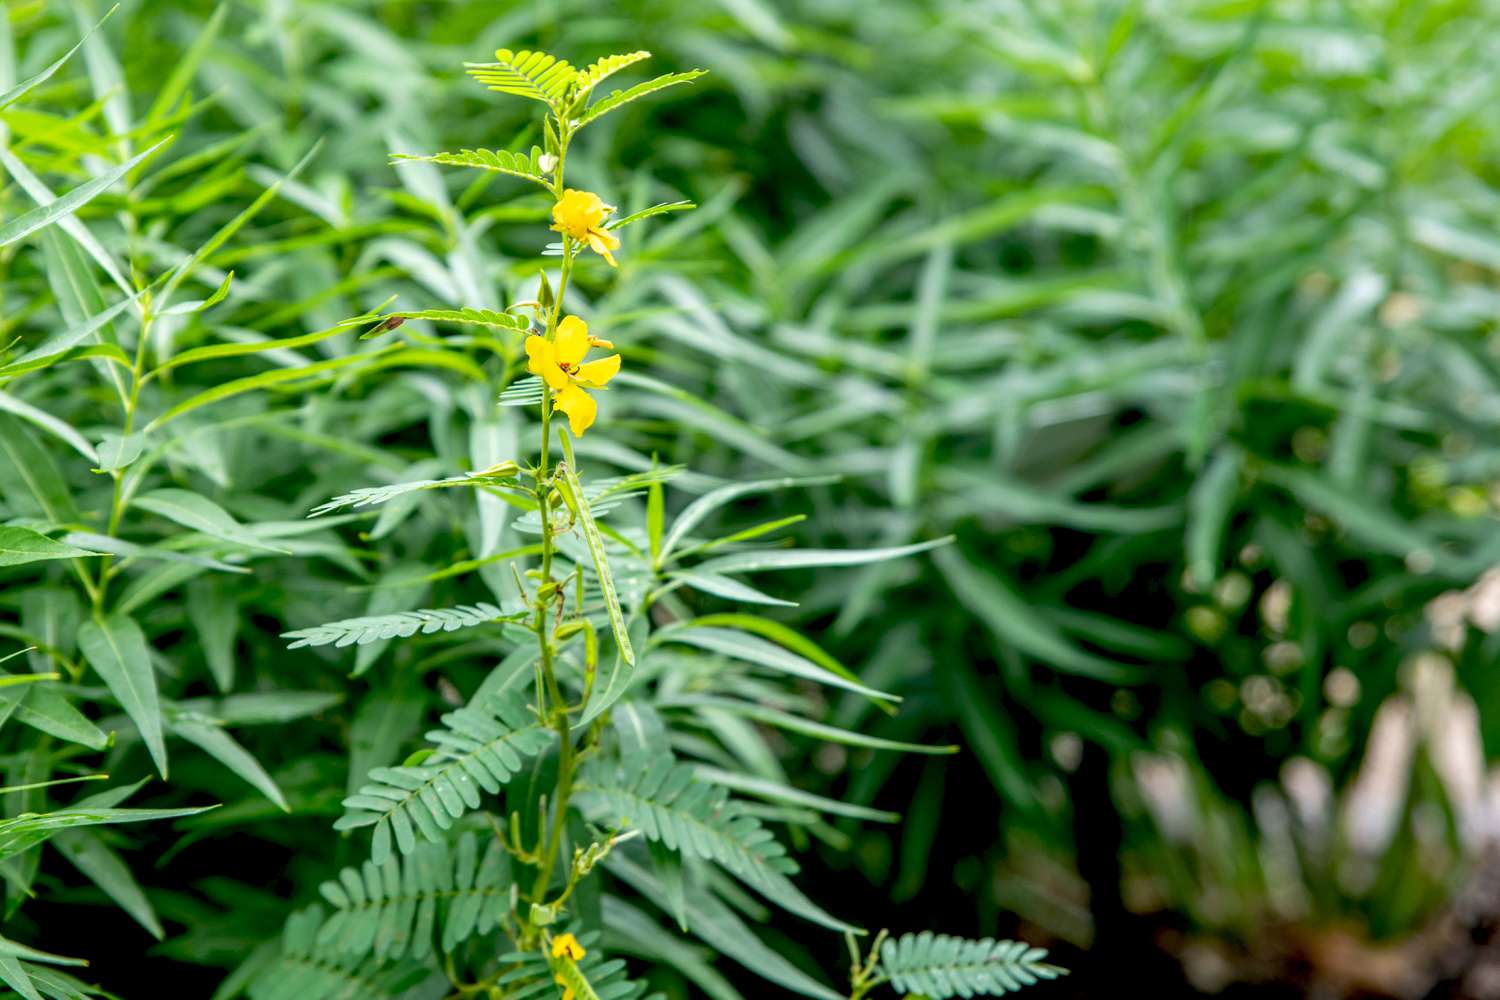 Partridge pea plant with thin stem, small feathery leaves and yellow flowers